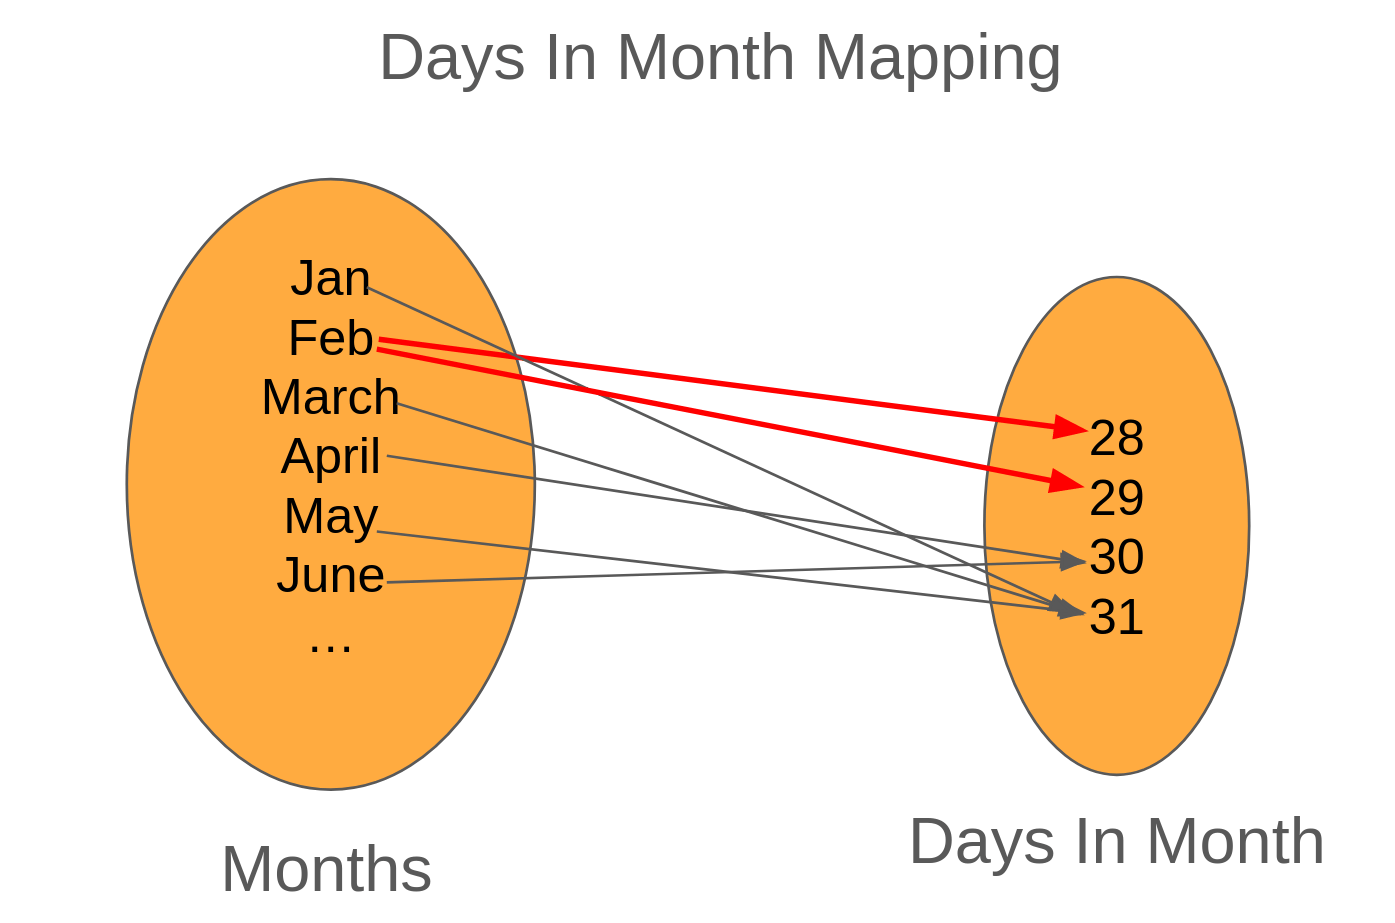 Broken Mapping for the Days In Month Function